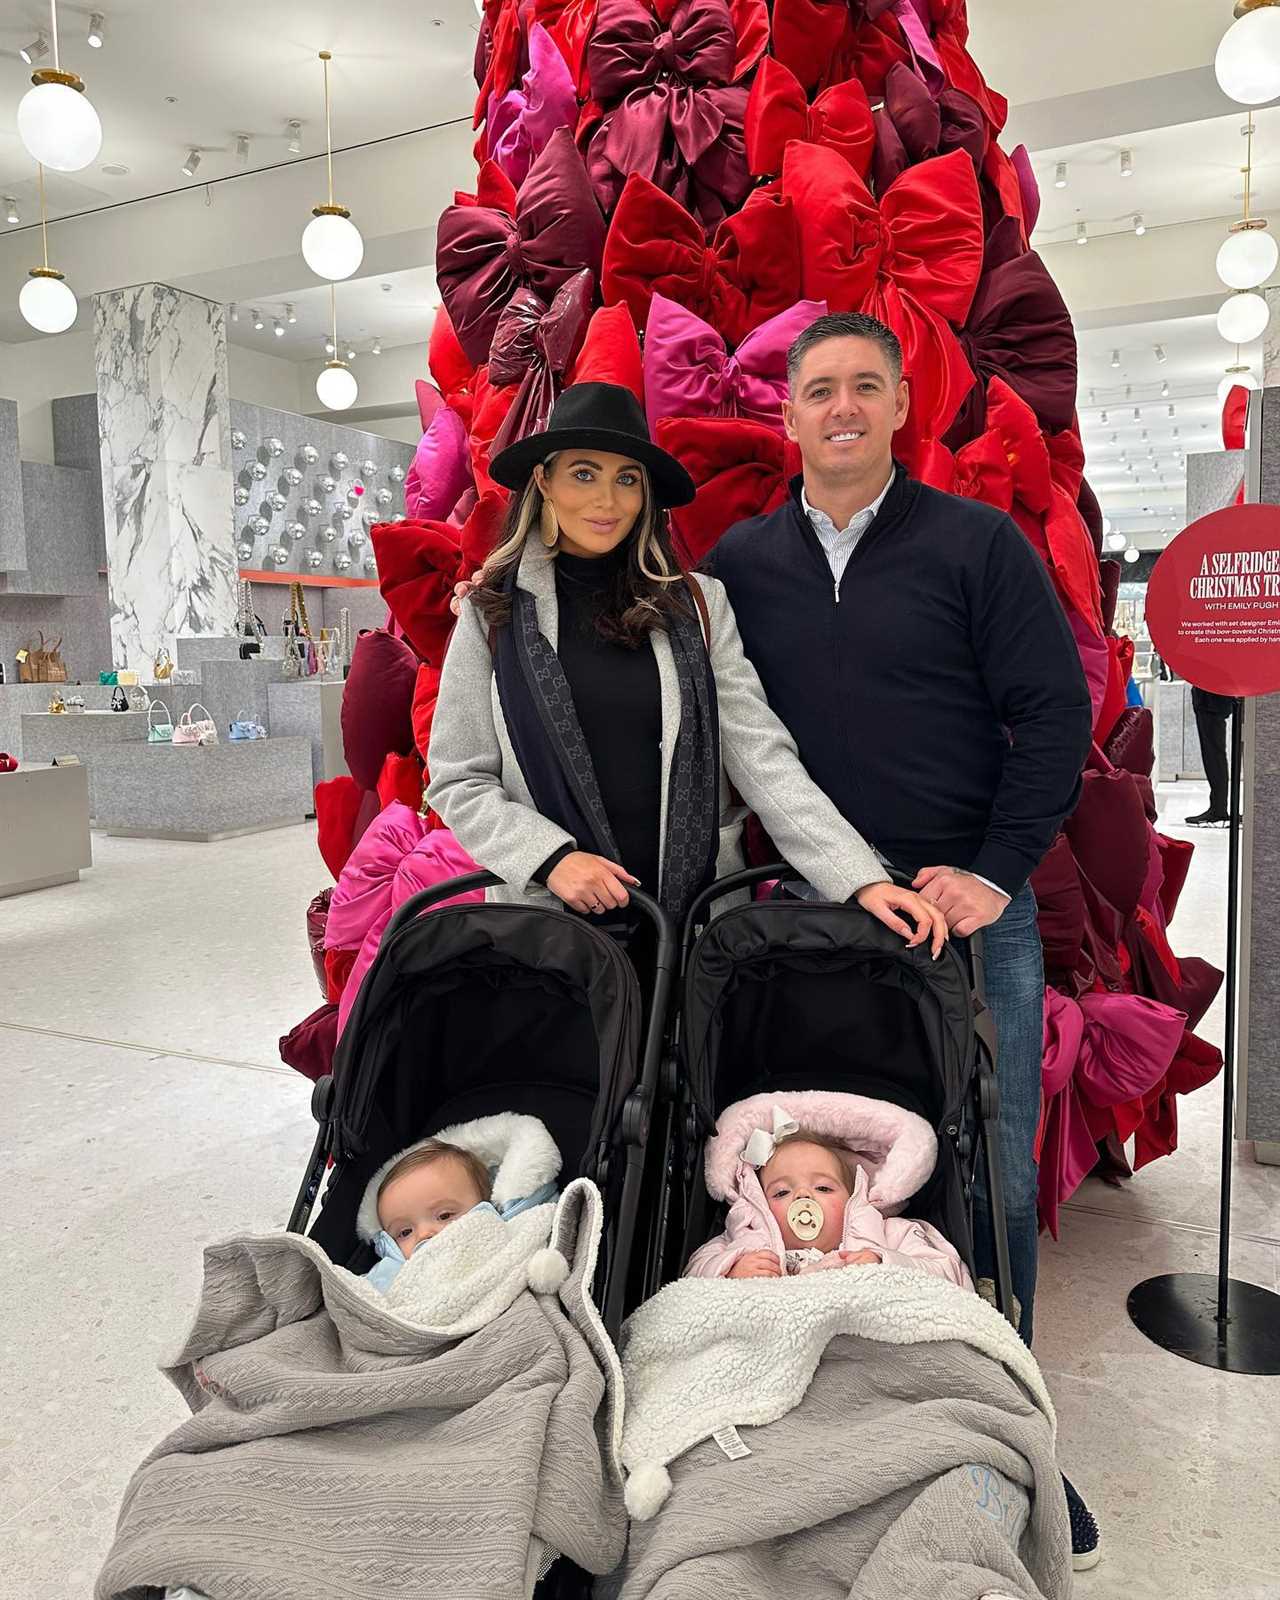 Terrified Amy Childs rushes baby son to hospital on Christmas Day just days after last visit